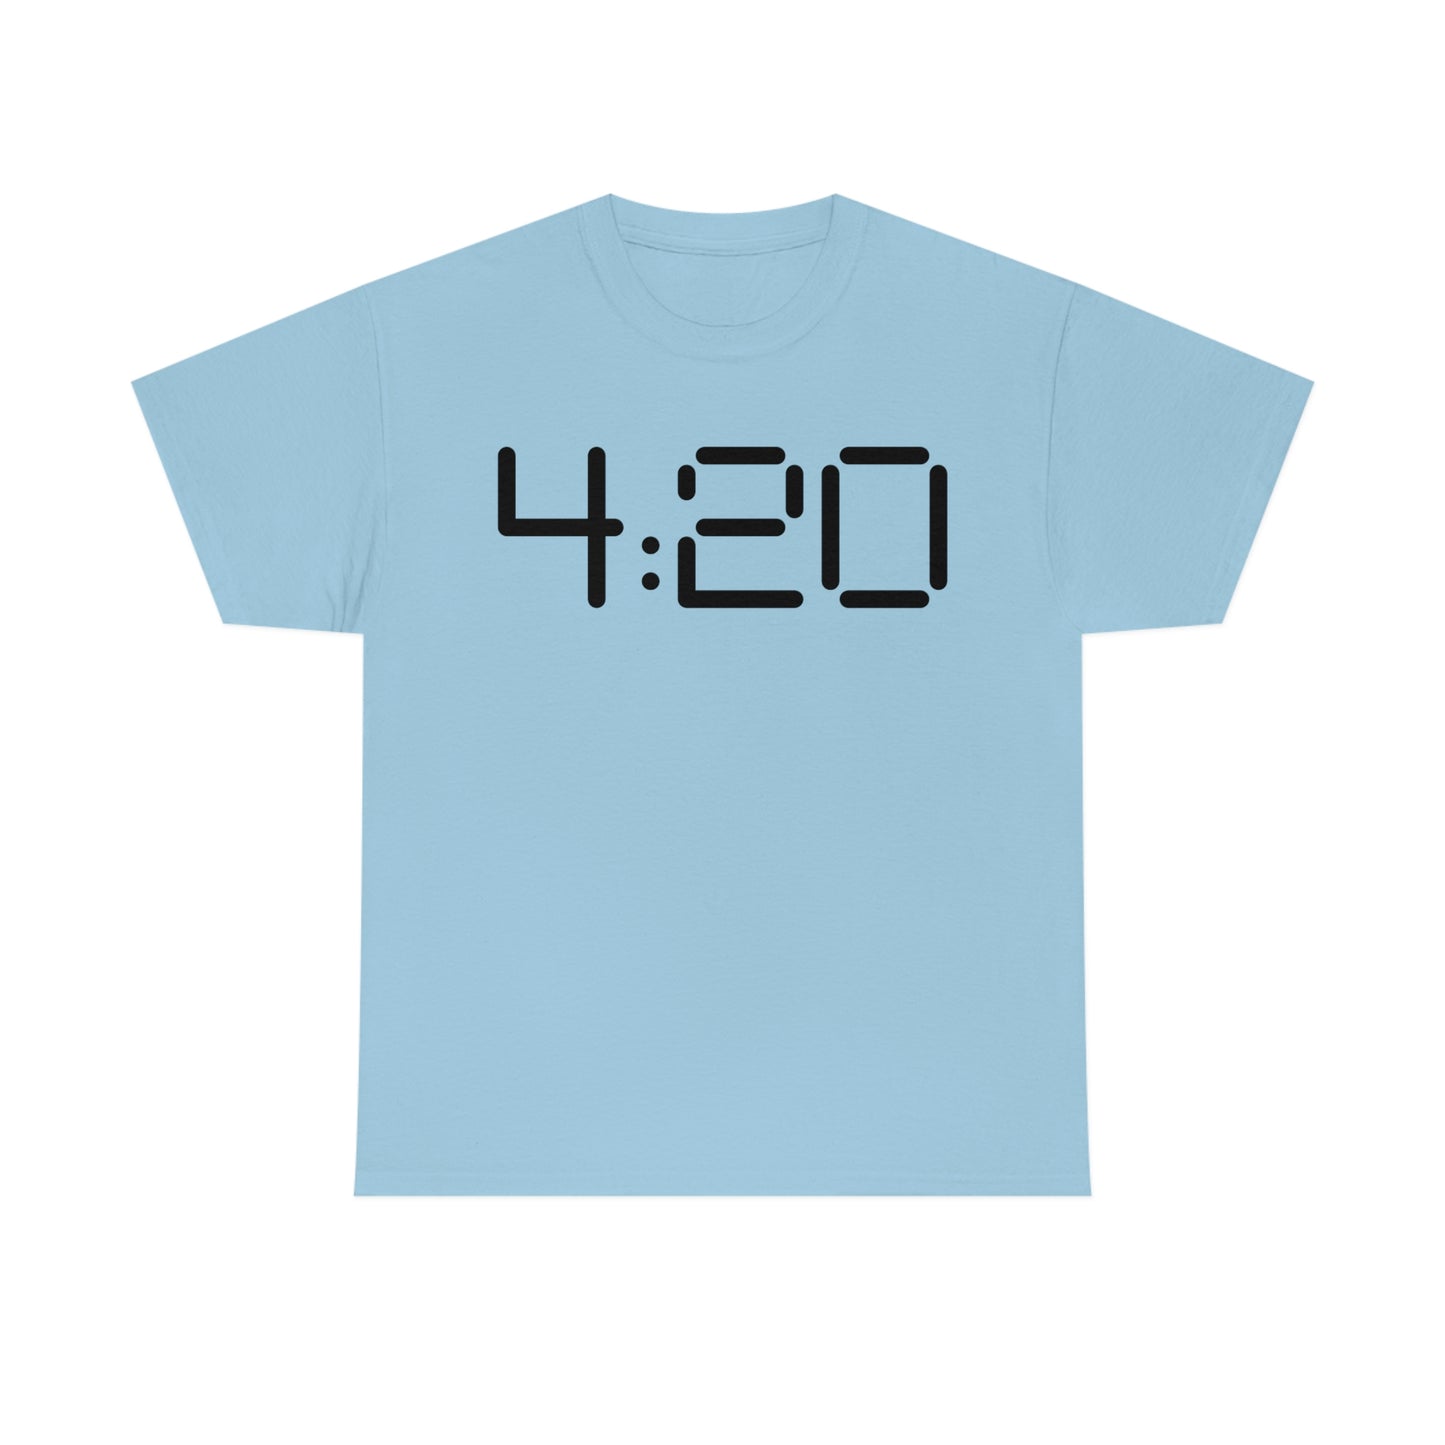 A light blue 420 Stoner Weed T-Shirt with the word 420 on it.